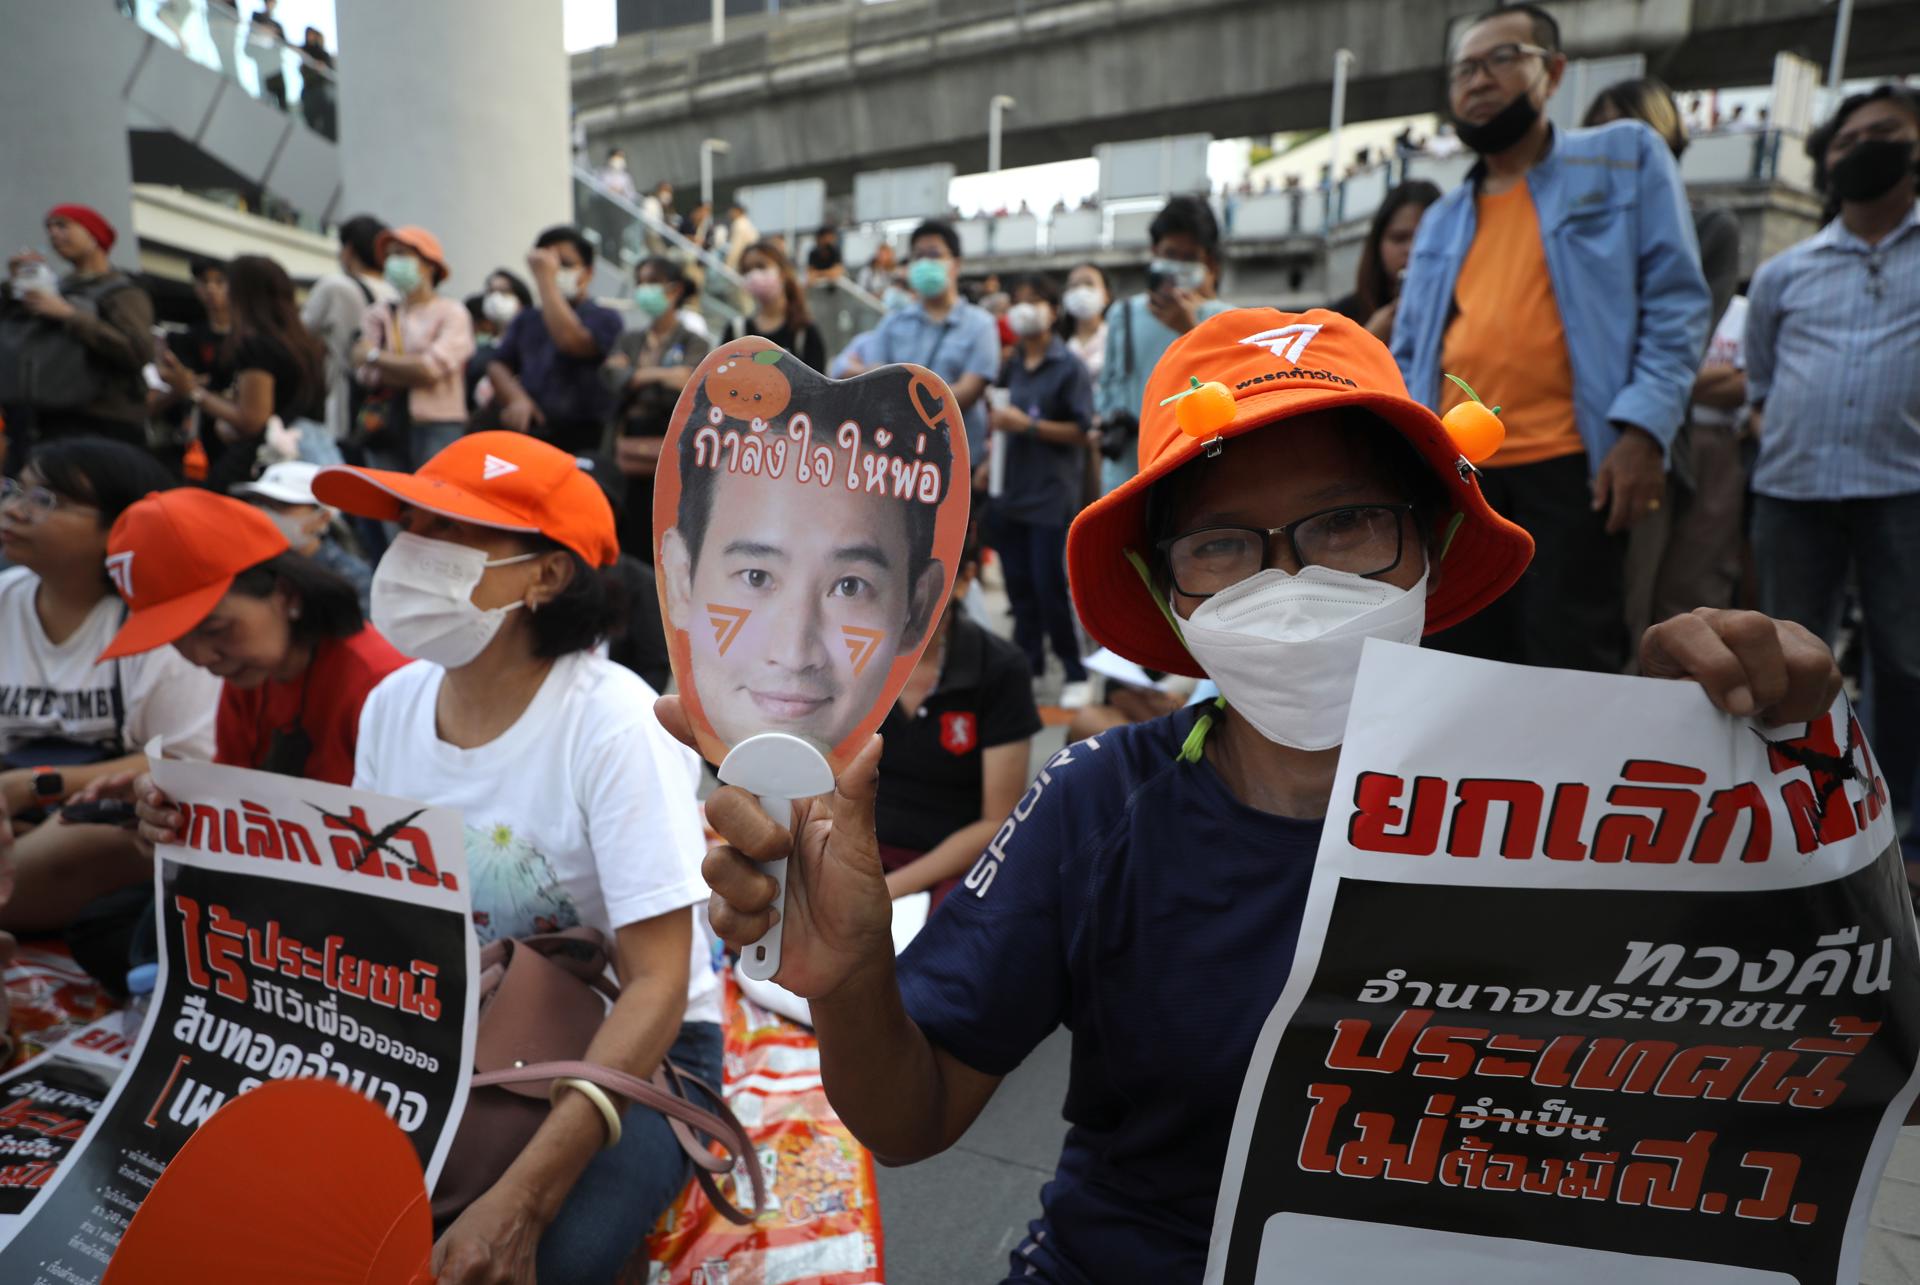 Supporters of Move Forward Party's leader and its prime ministerial candidate Pita Limjaroenrat hold signs against the Thai Senate as they gather for a protest outside the Bangkok Art and Culture Centre in Bangkok, Thailand, 14 July 2023. Hundreds of people gathered to protest against the Senate after the election front-runner Pita Limjaroenrat failed to secure a crucial vote to become Thailand's next prime minister in a joint session of the House of Representatives and Senate on 13 July. A majority of senators opposed voting for him. (Protestas, Tailandia) EFE/EPA/NARONG SANGNAK
